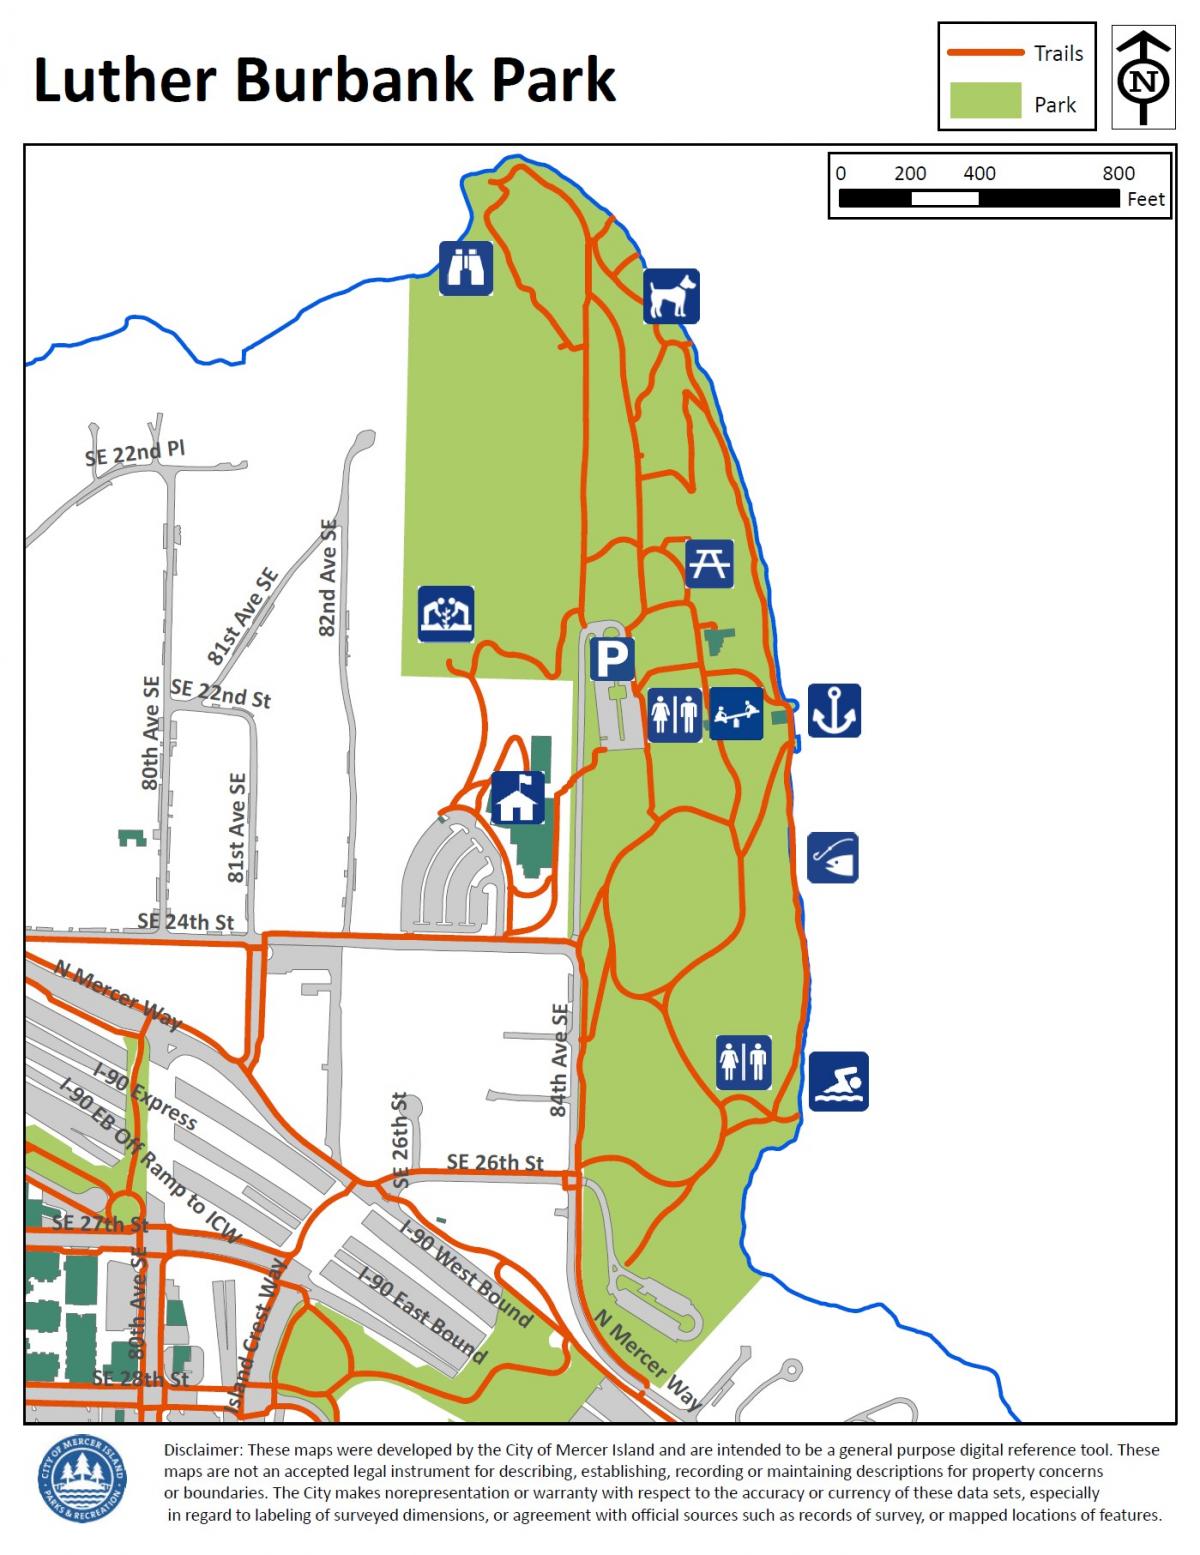 Map of trails in Luther Burbank Park in Mercer Island, WA. 